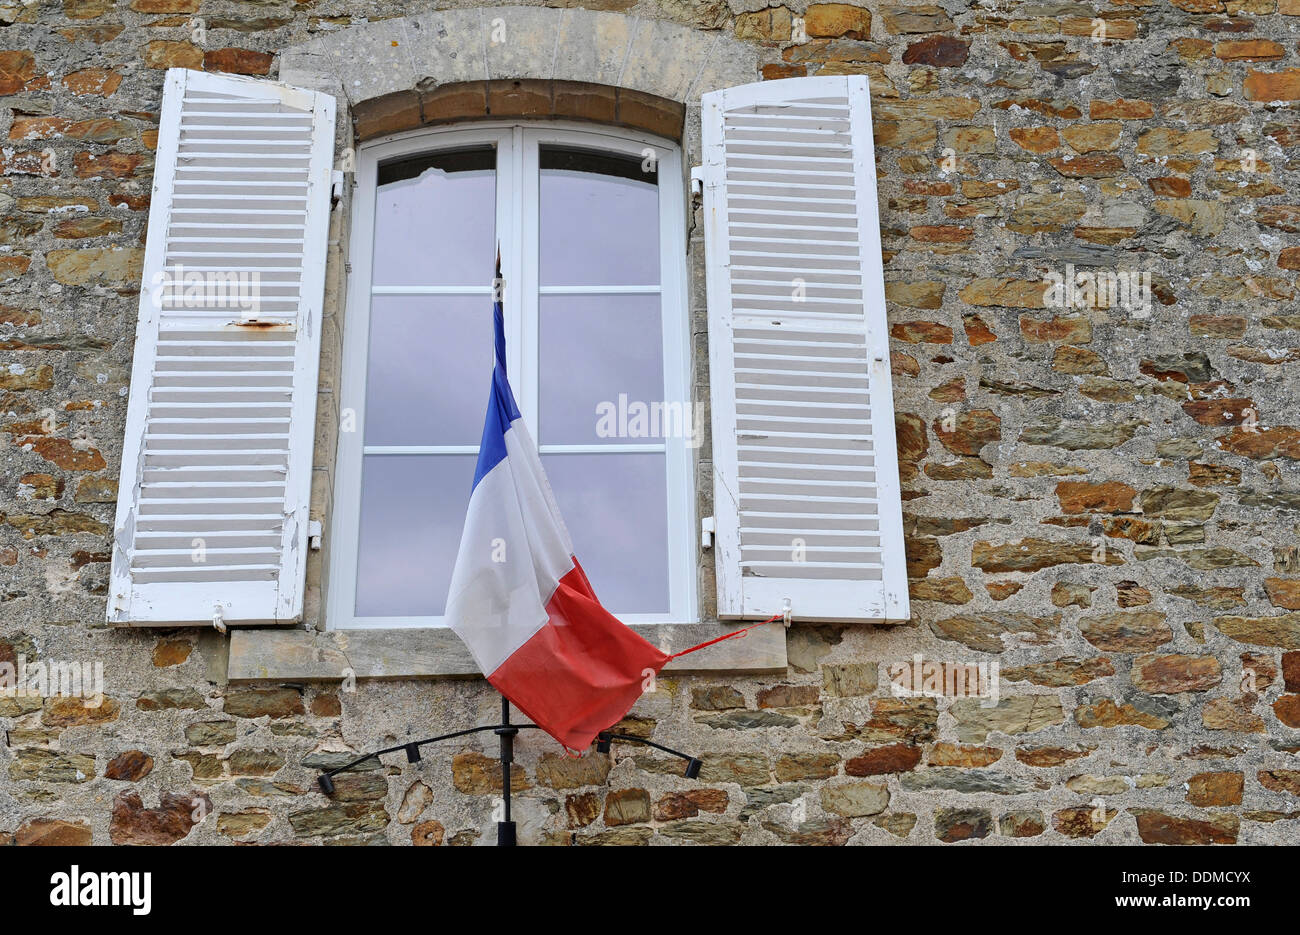 Open shuttered windows at the French mayors office with French flag at Le Hommet dArthenay, Normandy, France Stock Photo